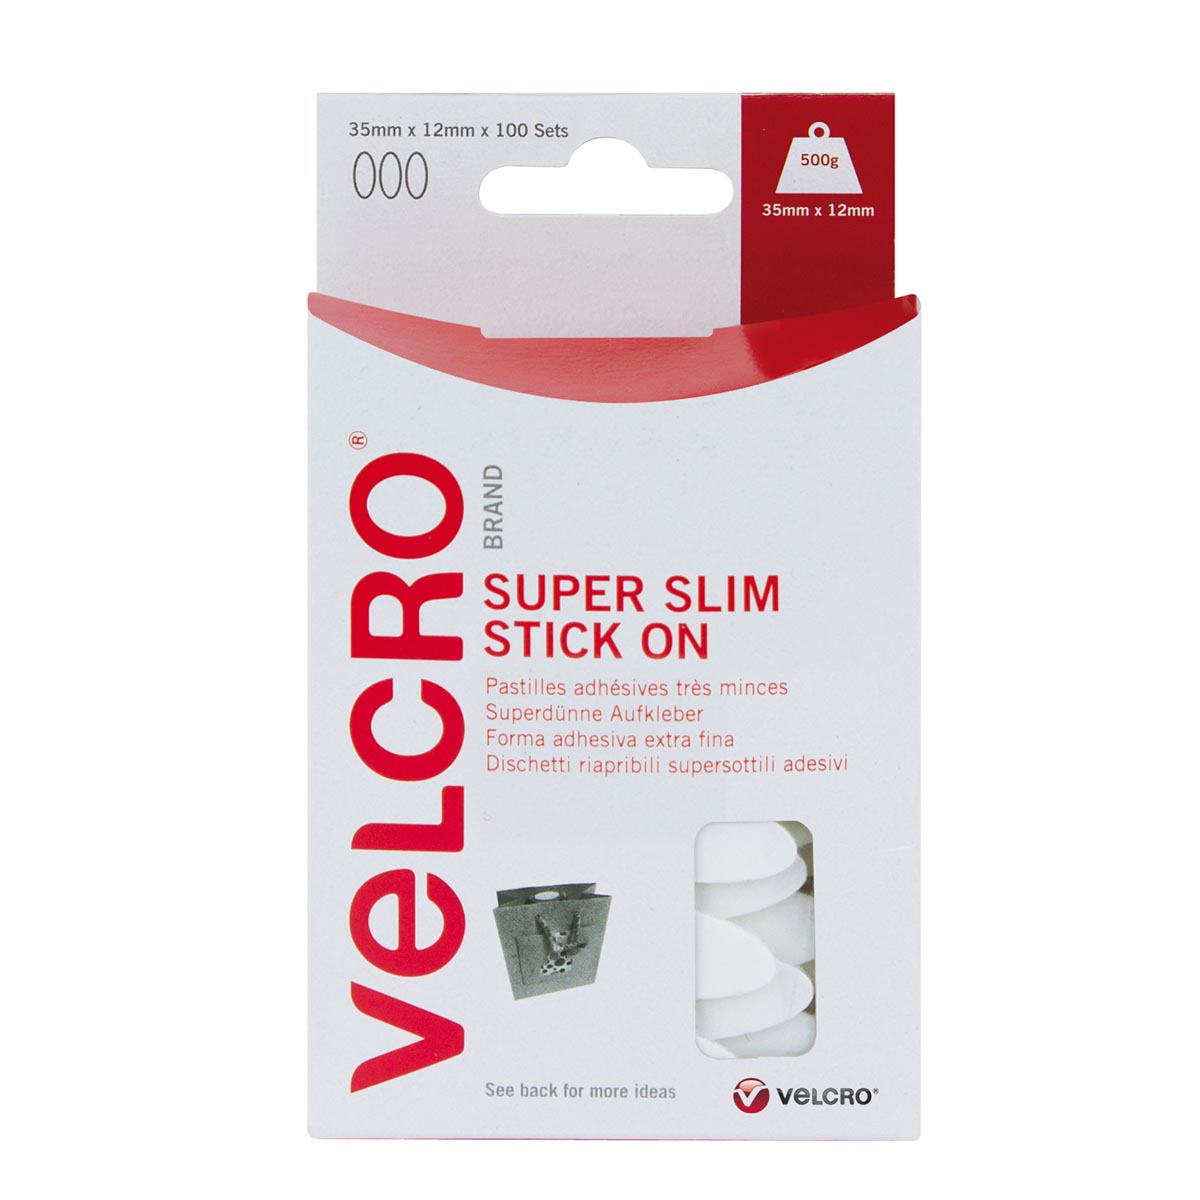 VELCRO® Brand VELCOIN® Adhesive Backed Coins